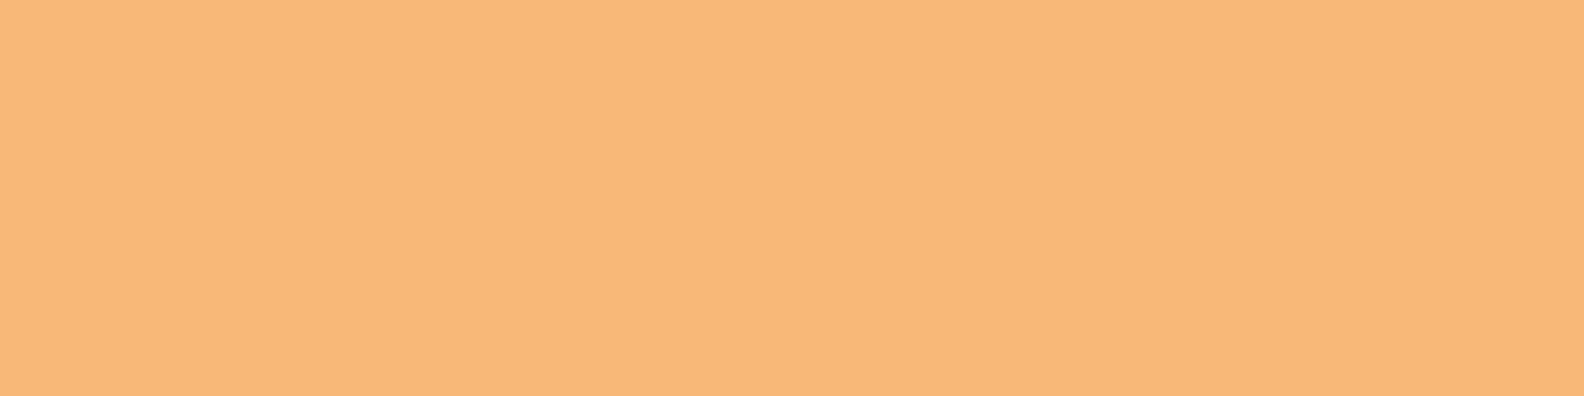 1584x396 Mellow Apricot Solid Color Background